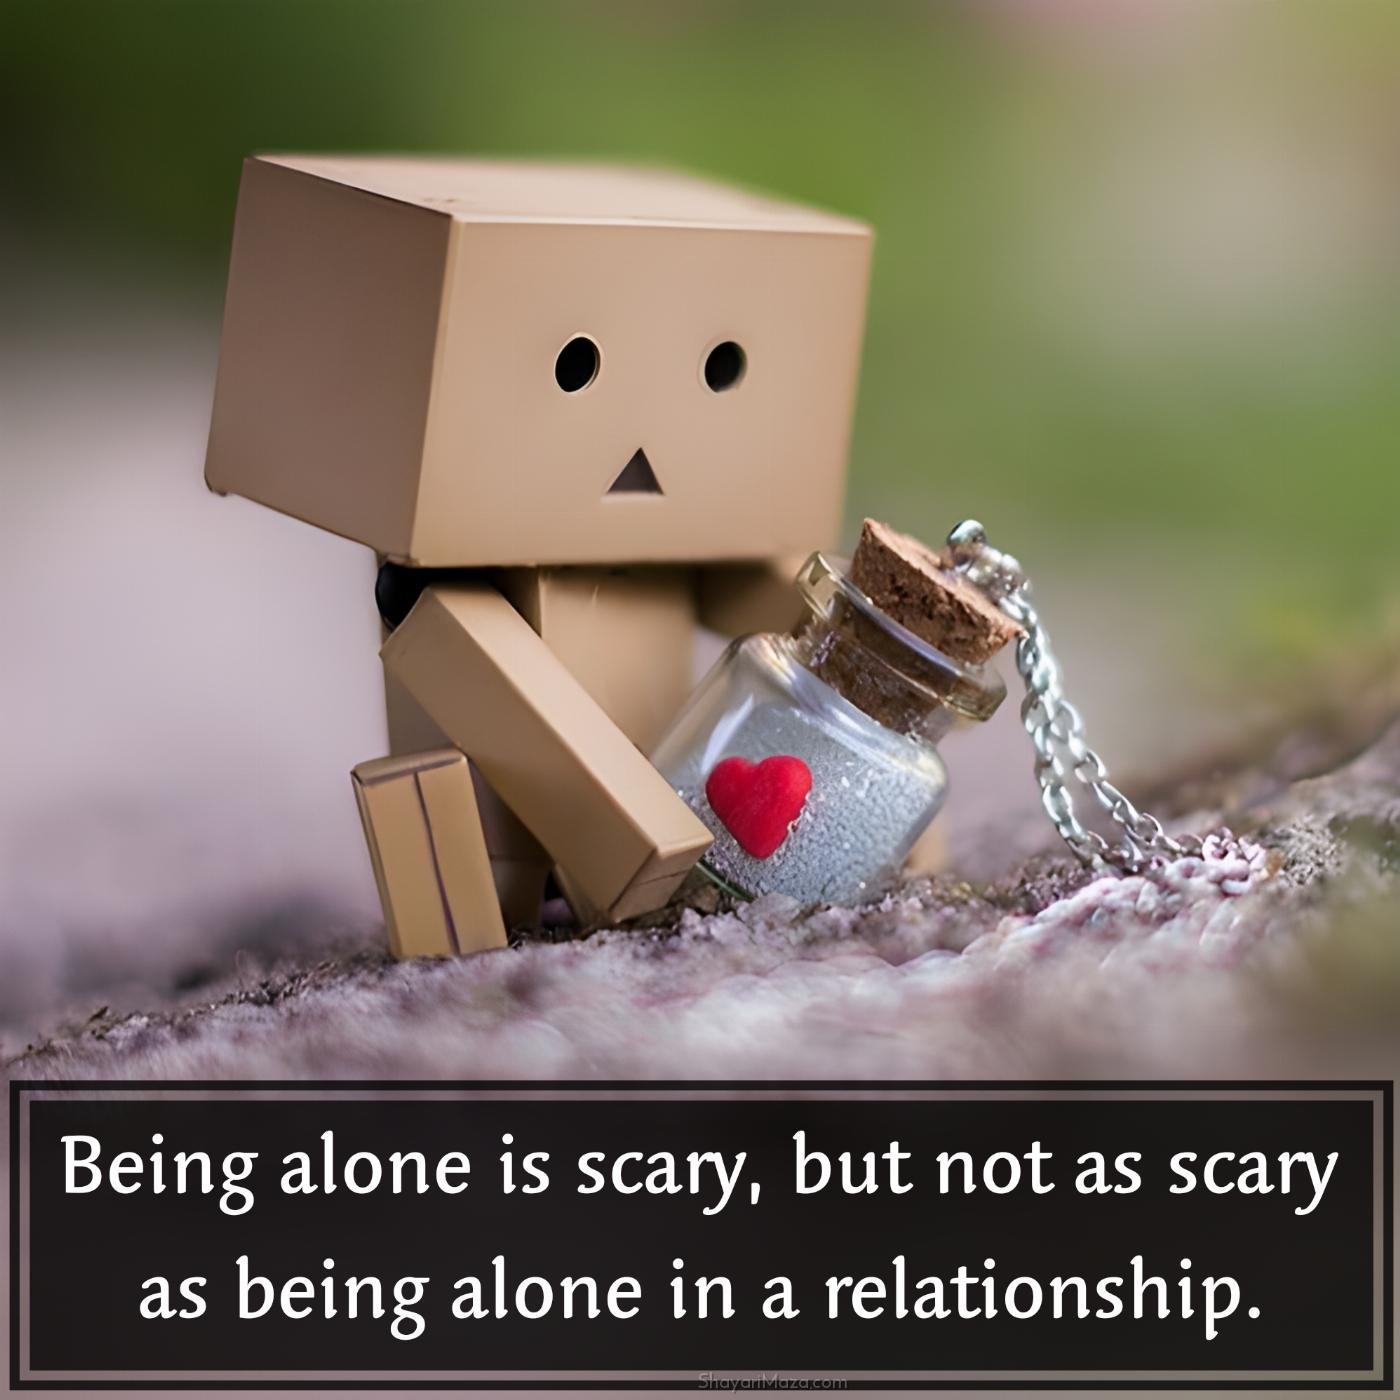 Being alone is scary but not as scary as being alone